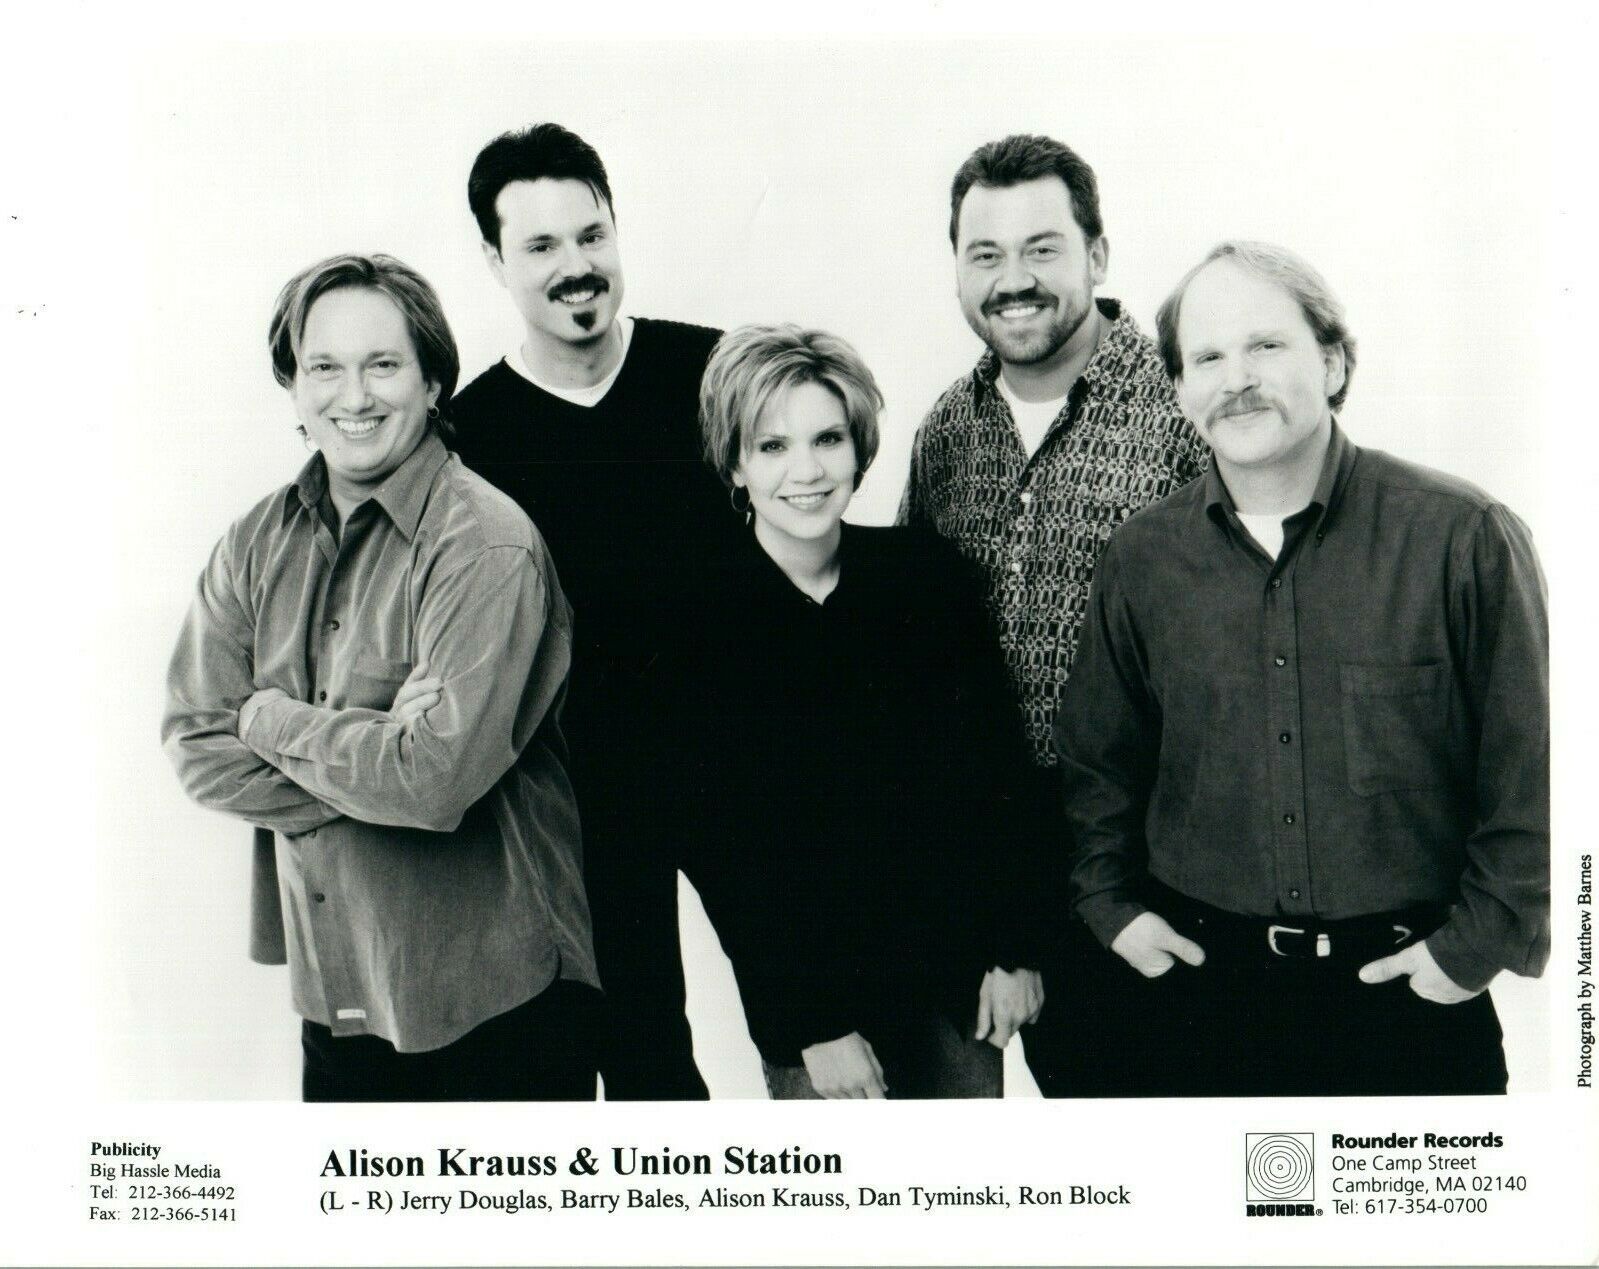 ALISON KRAUSS & UNION STATION Country Music Band 8x10 Promo Press Photo Poster painting Rounder